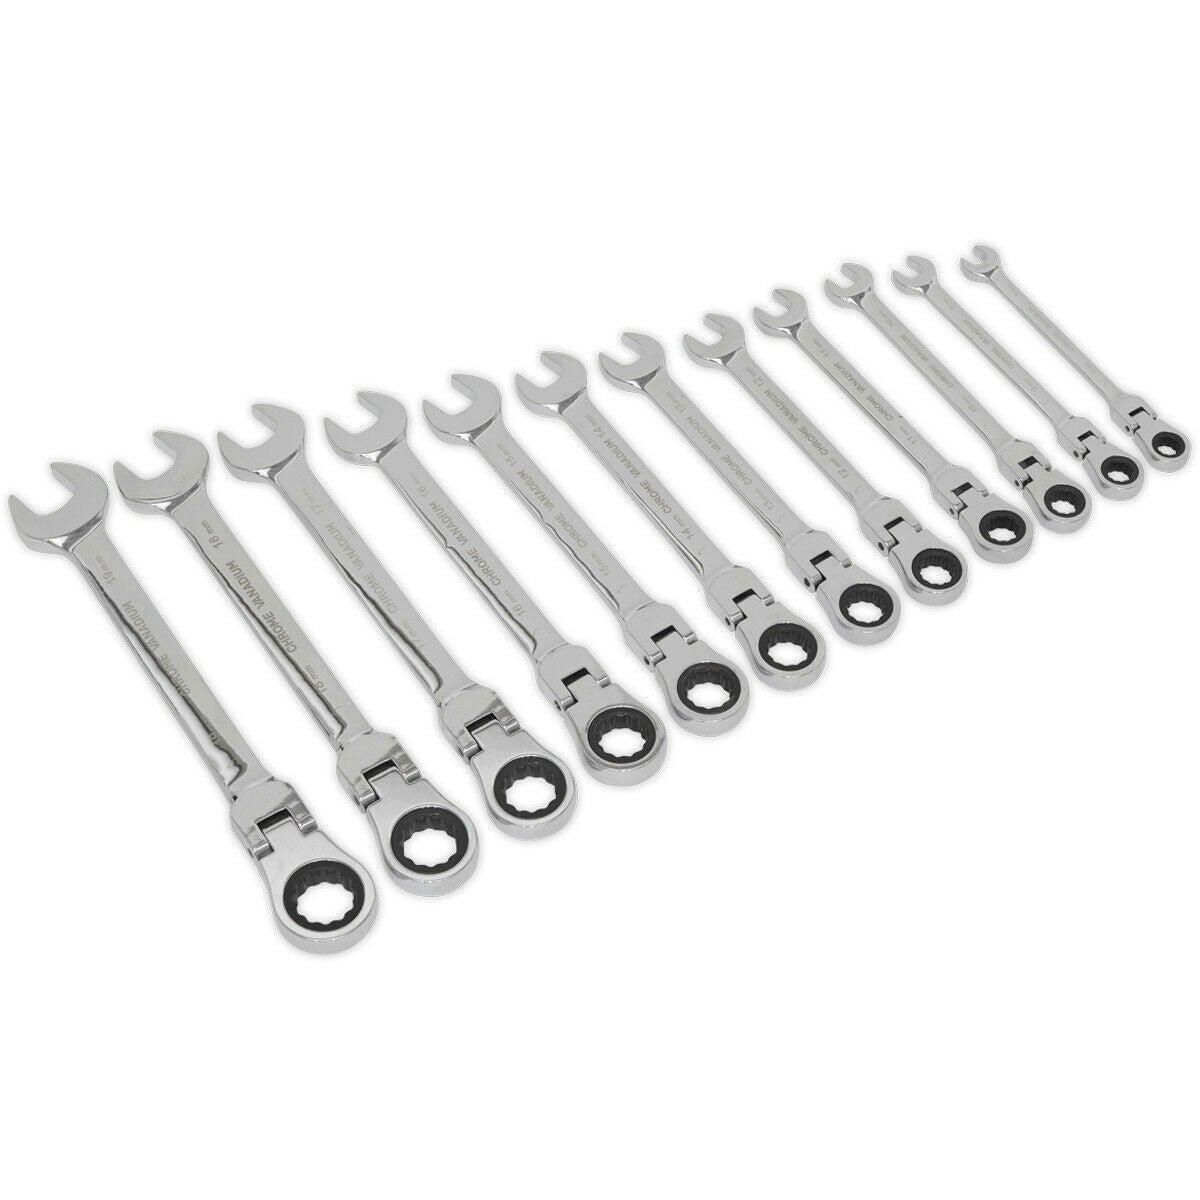 12pc Flexible Head Ratchet Combination Spanner Set - 12 Point Moving Metric Ring